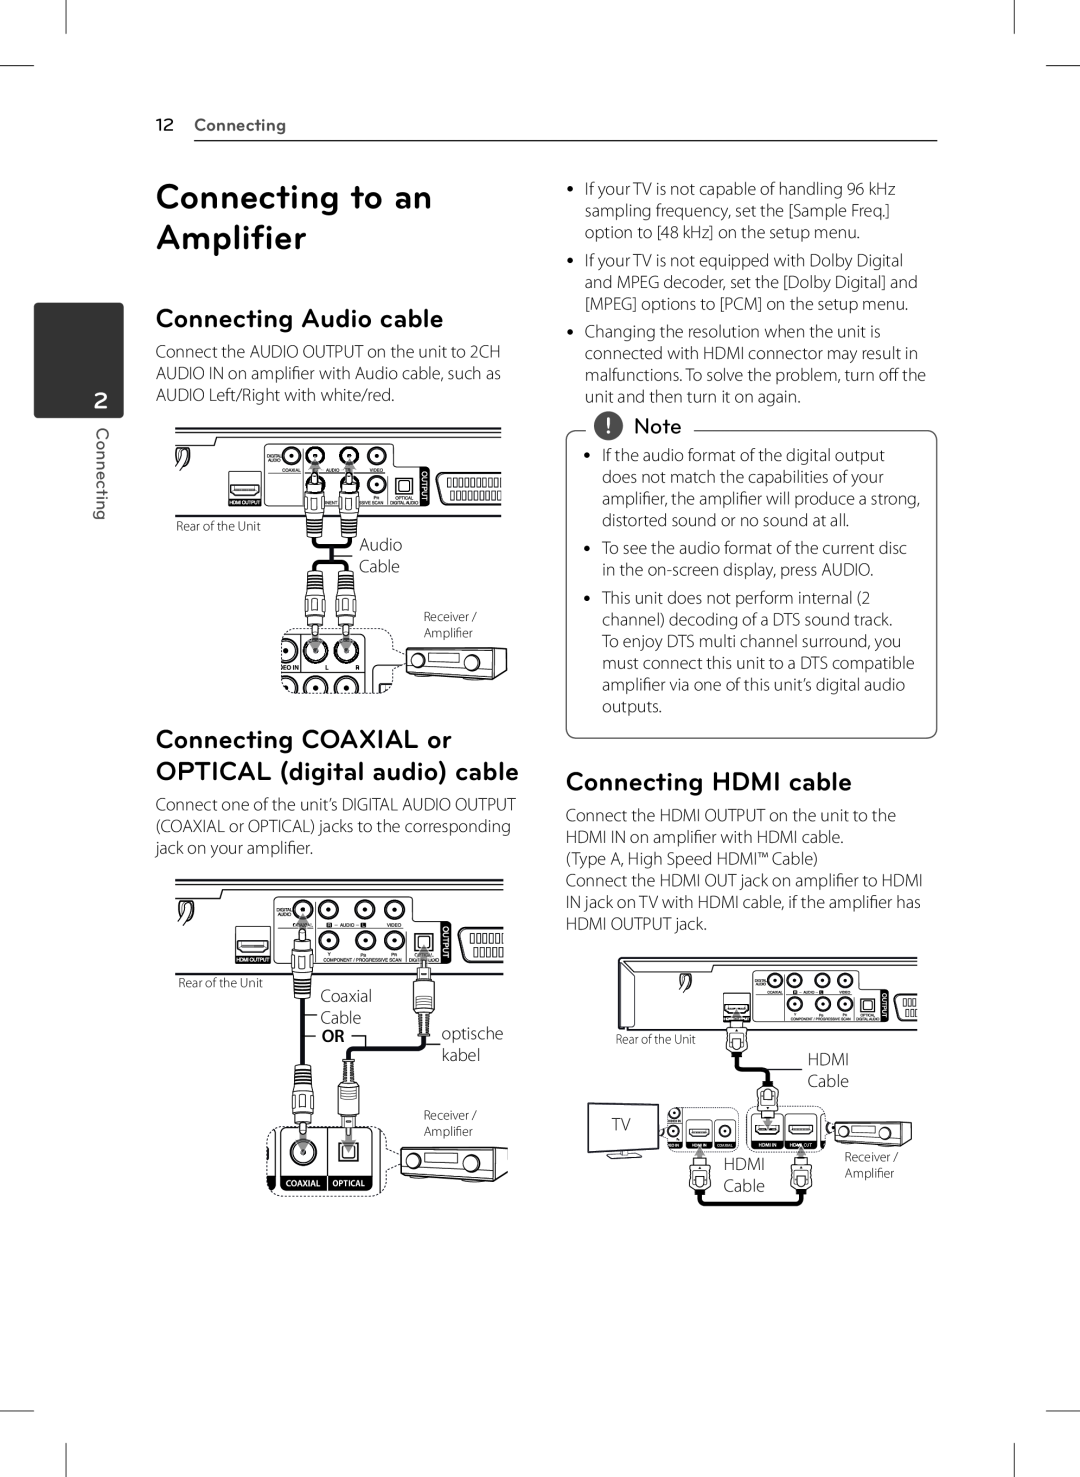 LG Electronics DVX692H owner manual Connecting to an, Amplifier, Connecting Audio cable, Connecting HDMI cable 